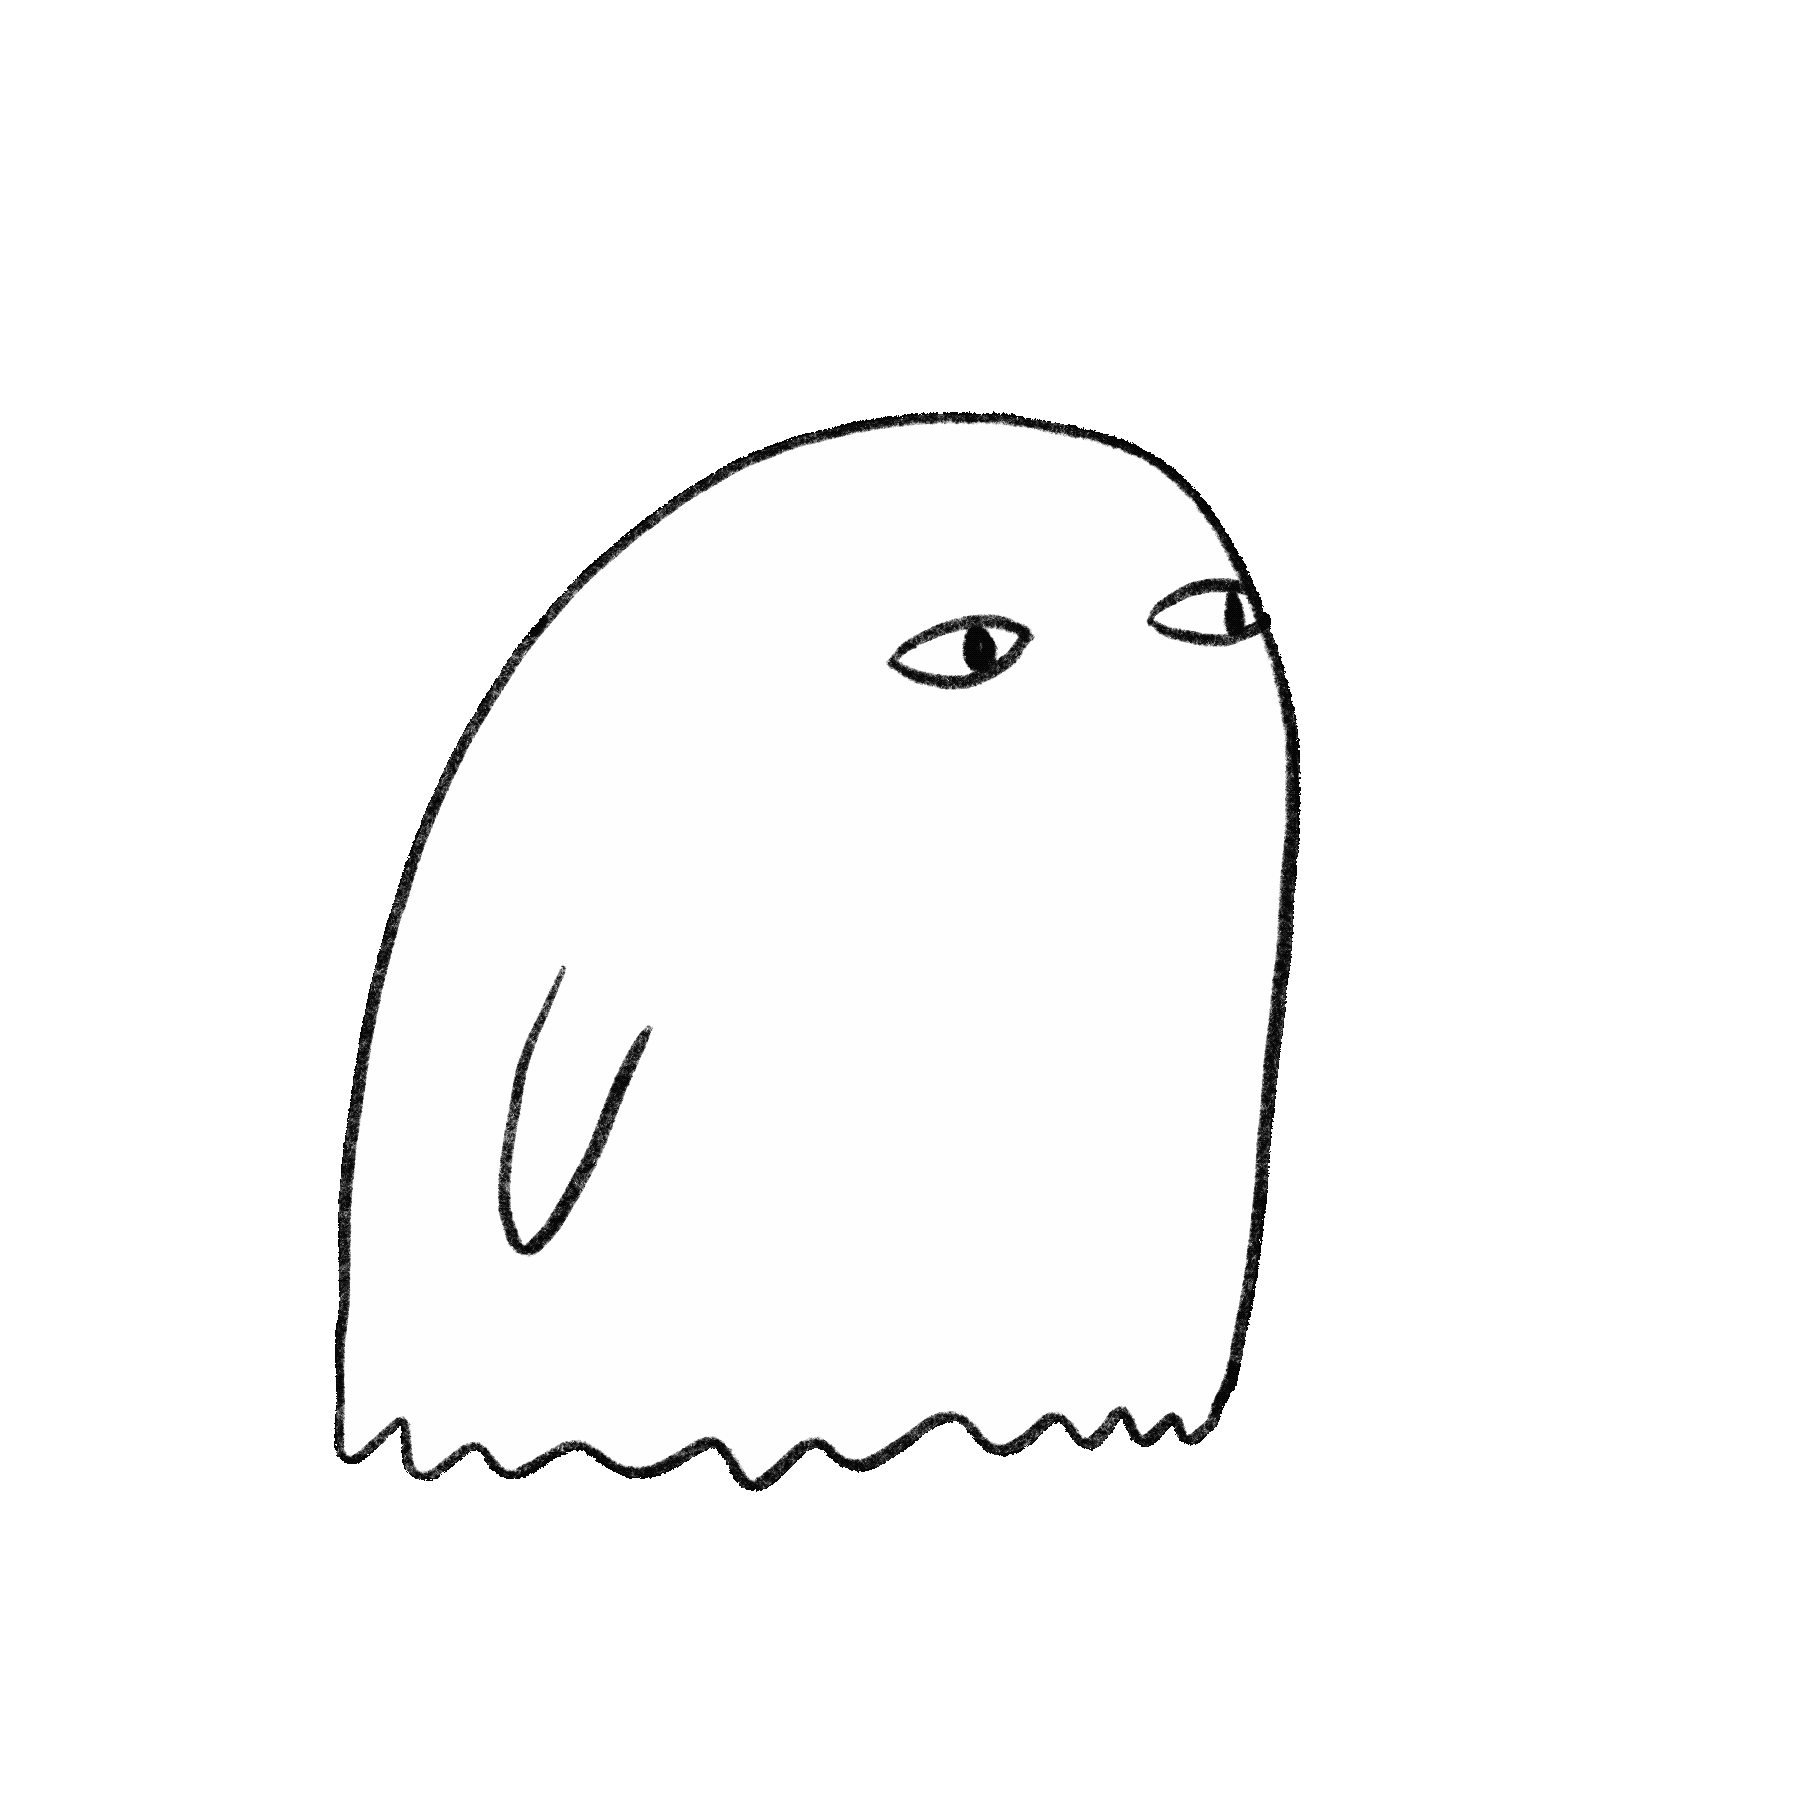 chris barense recommends cute ghost gif pic